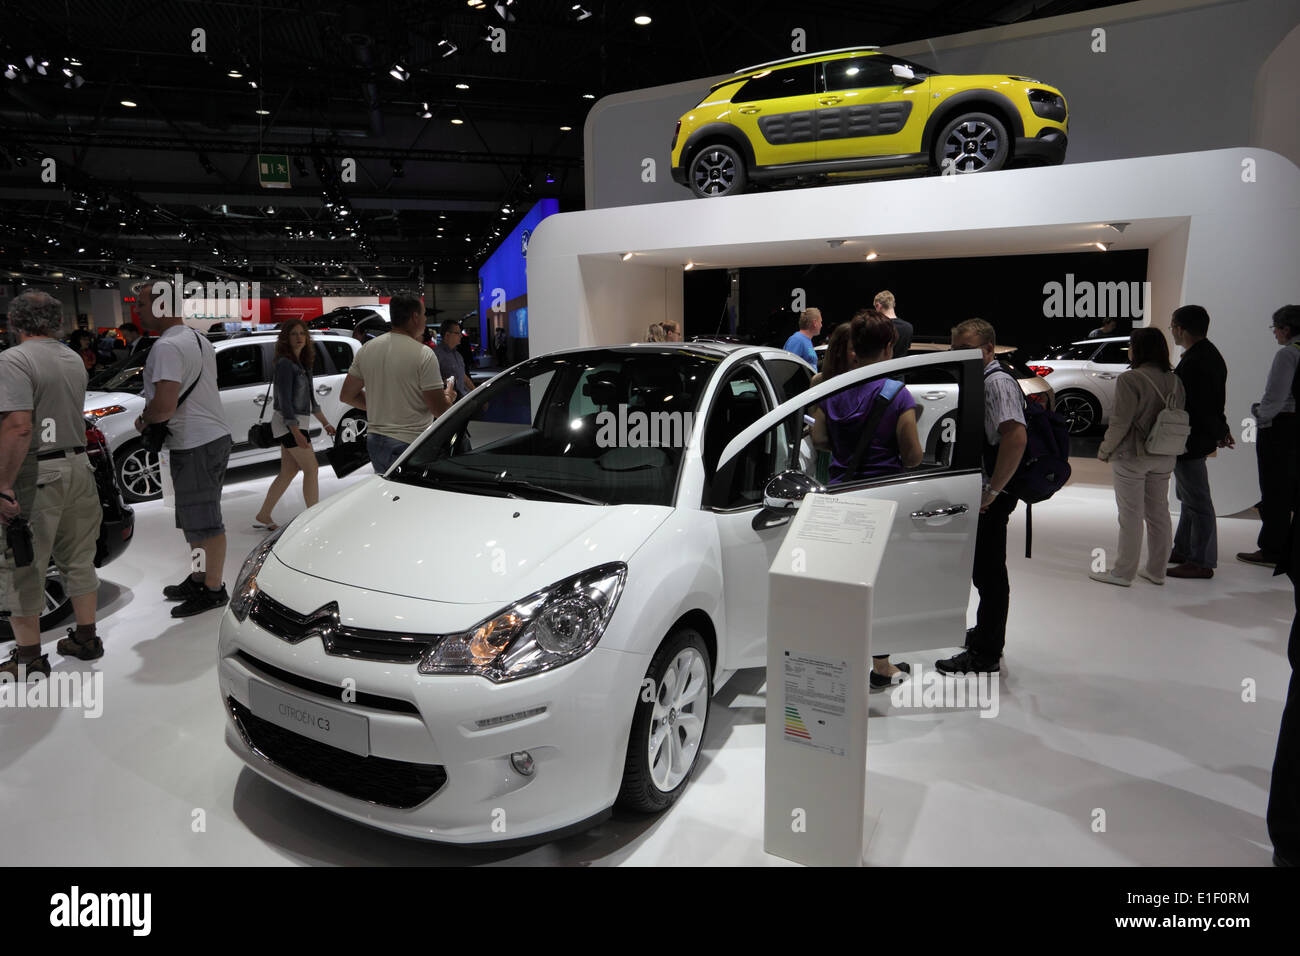 New Citroen C3 at the AMI - Auto Mobile International Trade Fair on June 1st, 2014 in Leipzig, Saxony, Germany Stock Photo